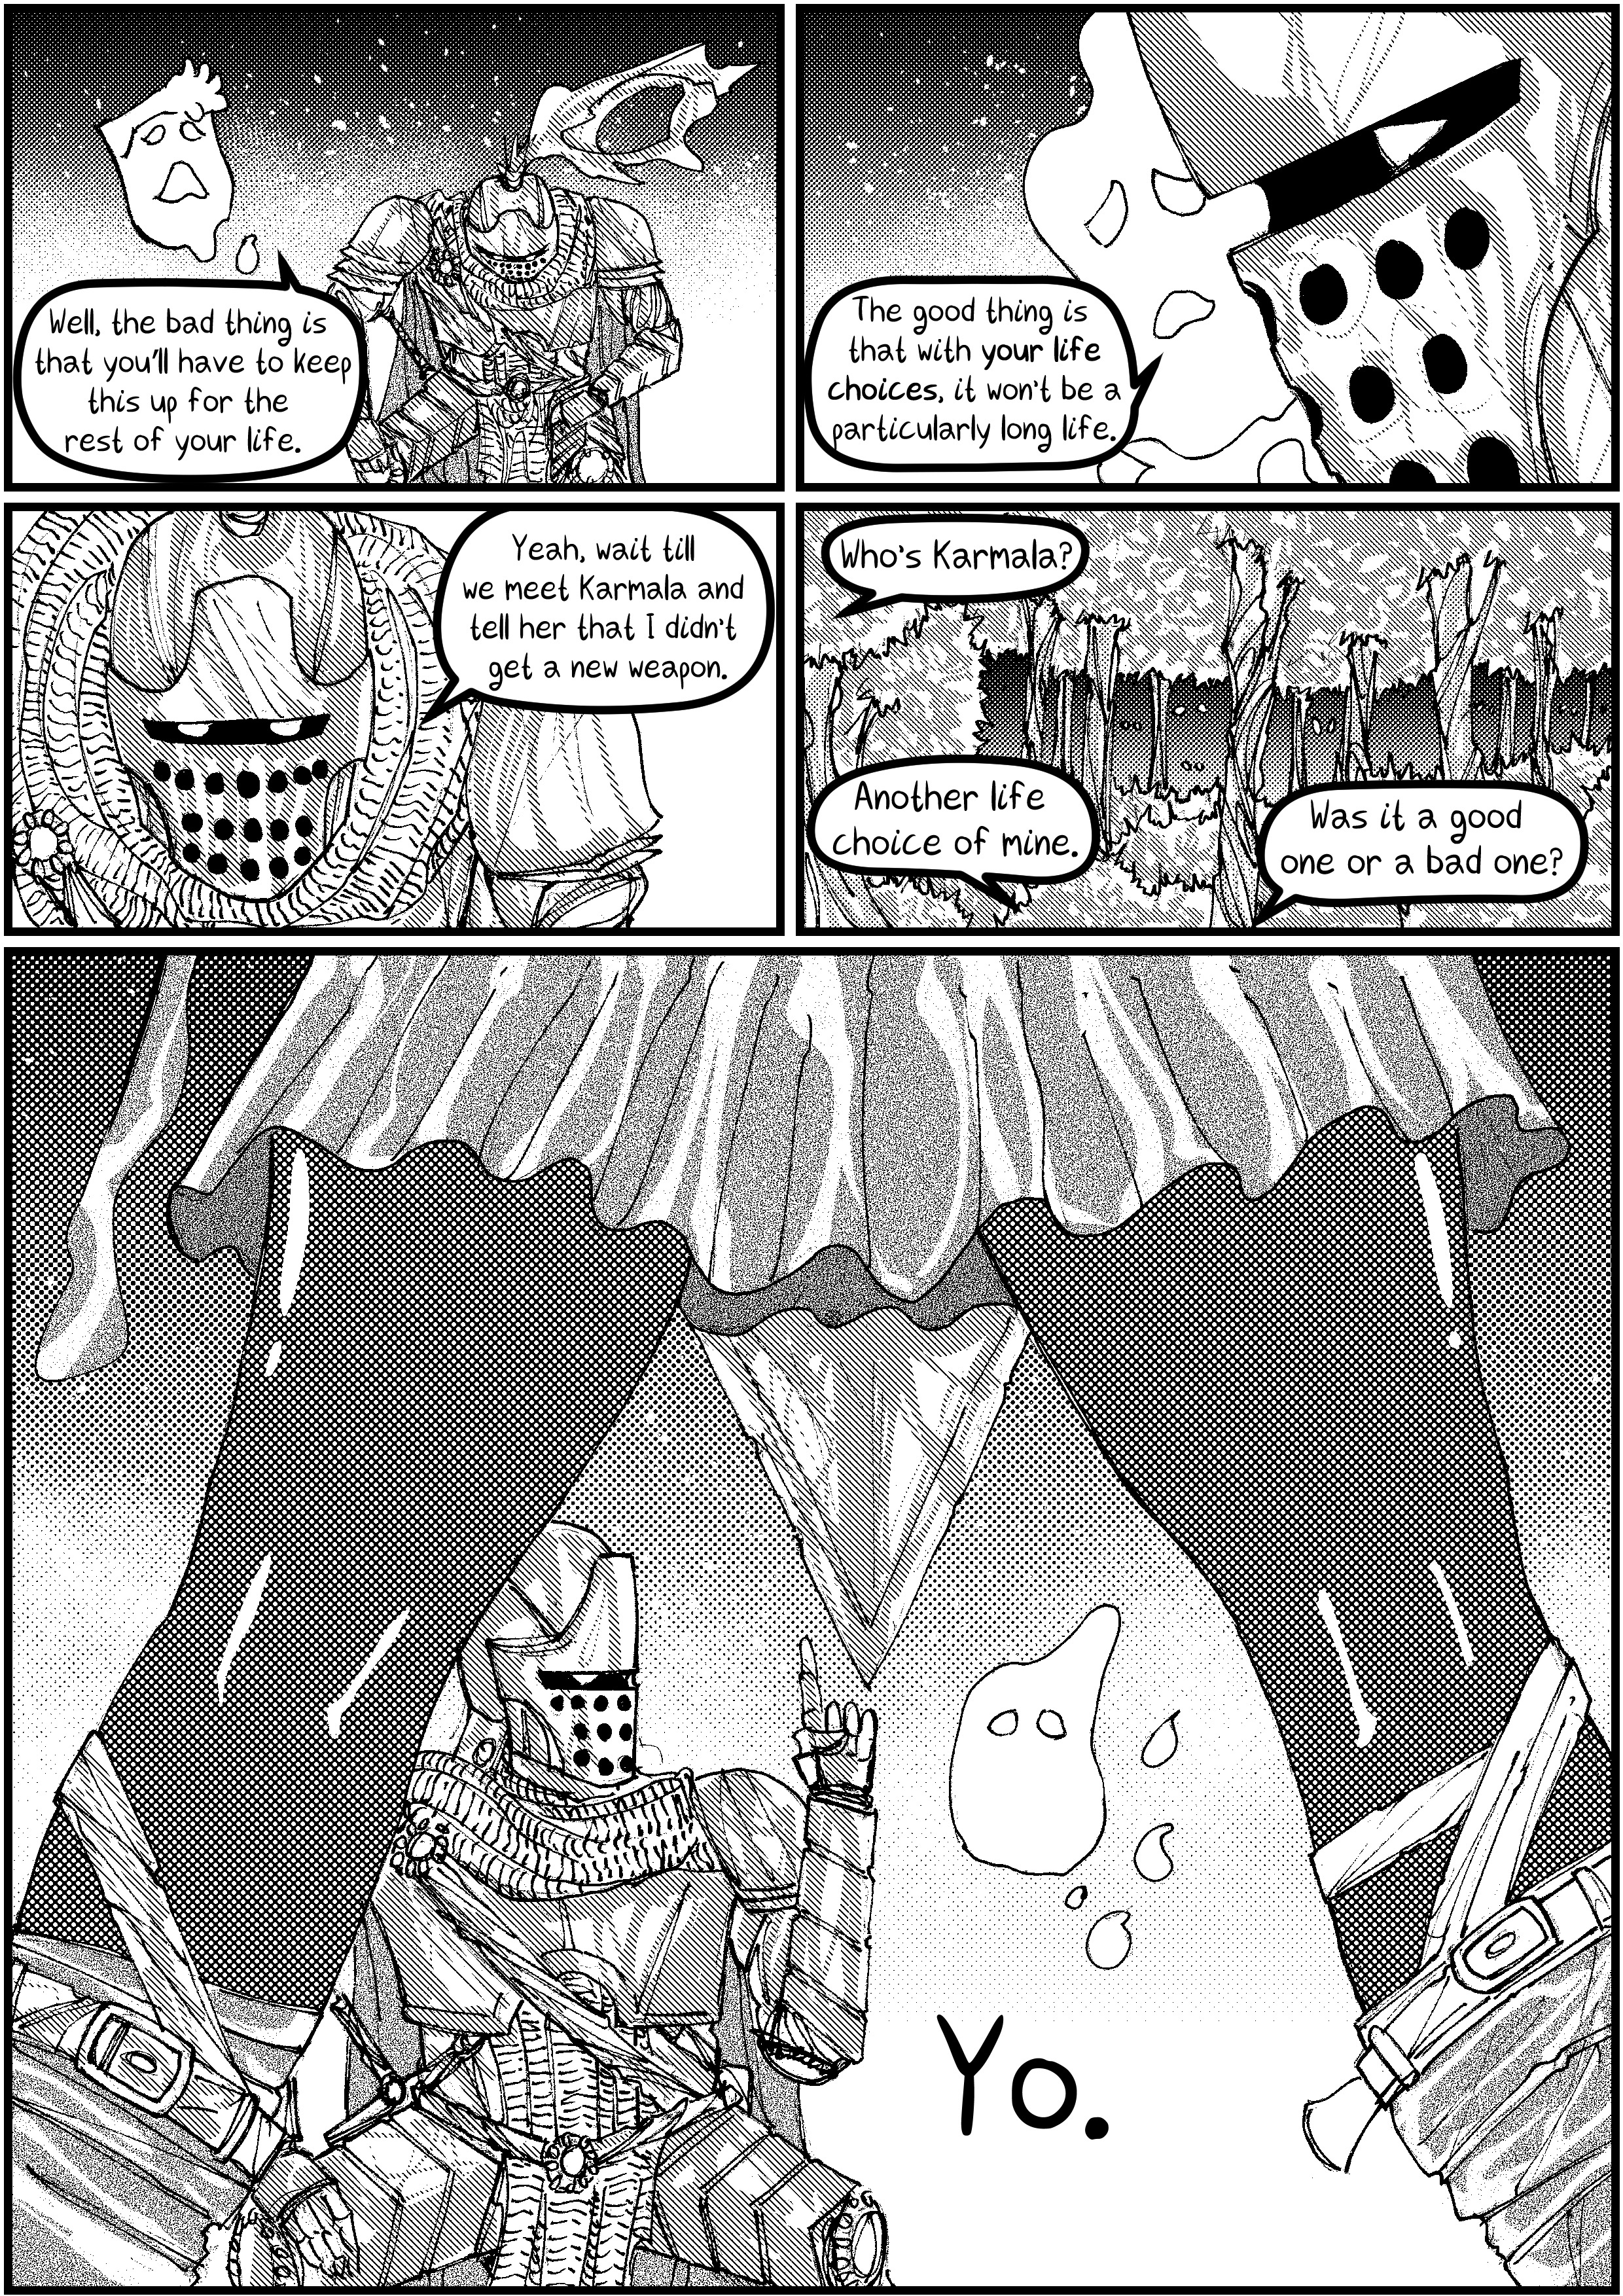 Noheroes! - Page 3